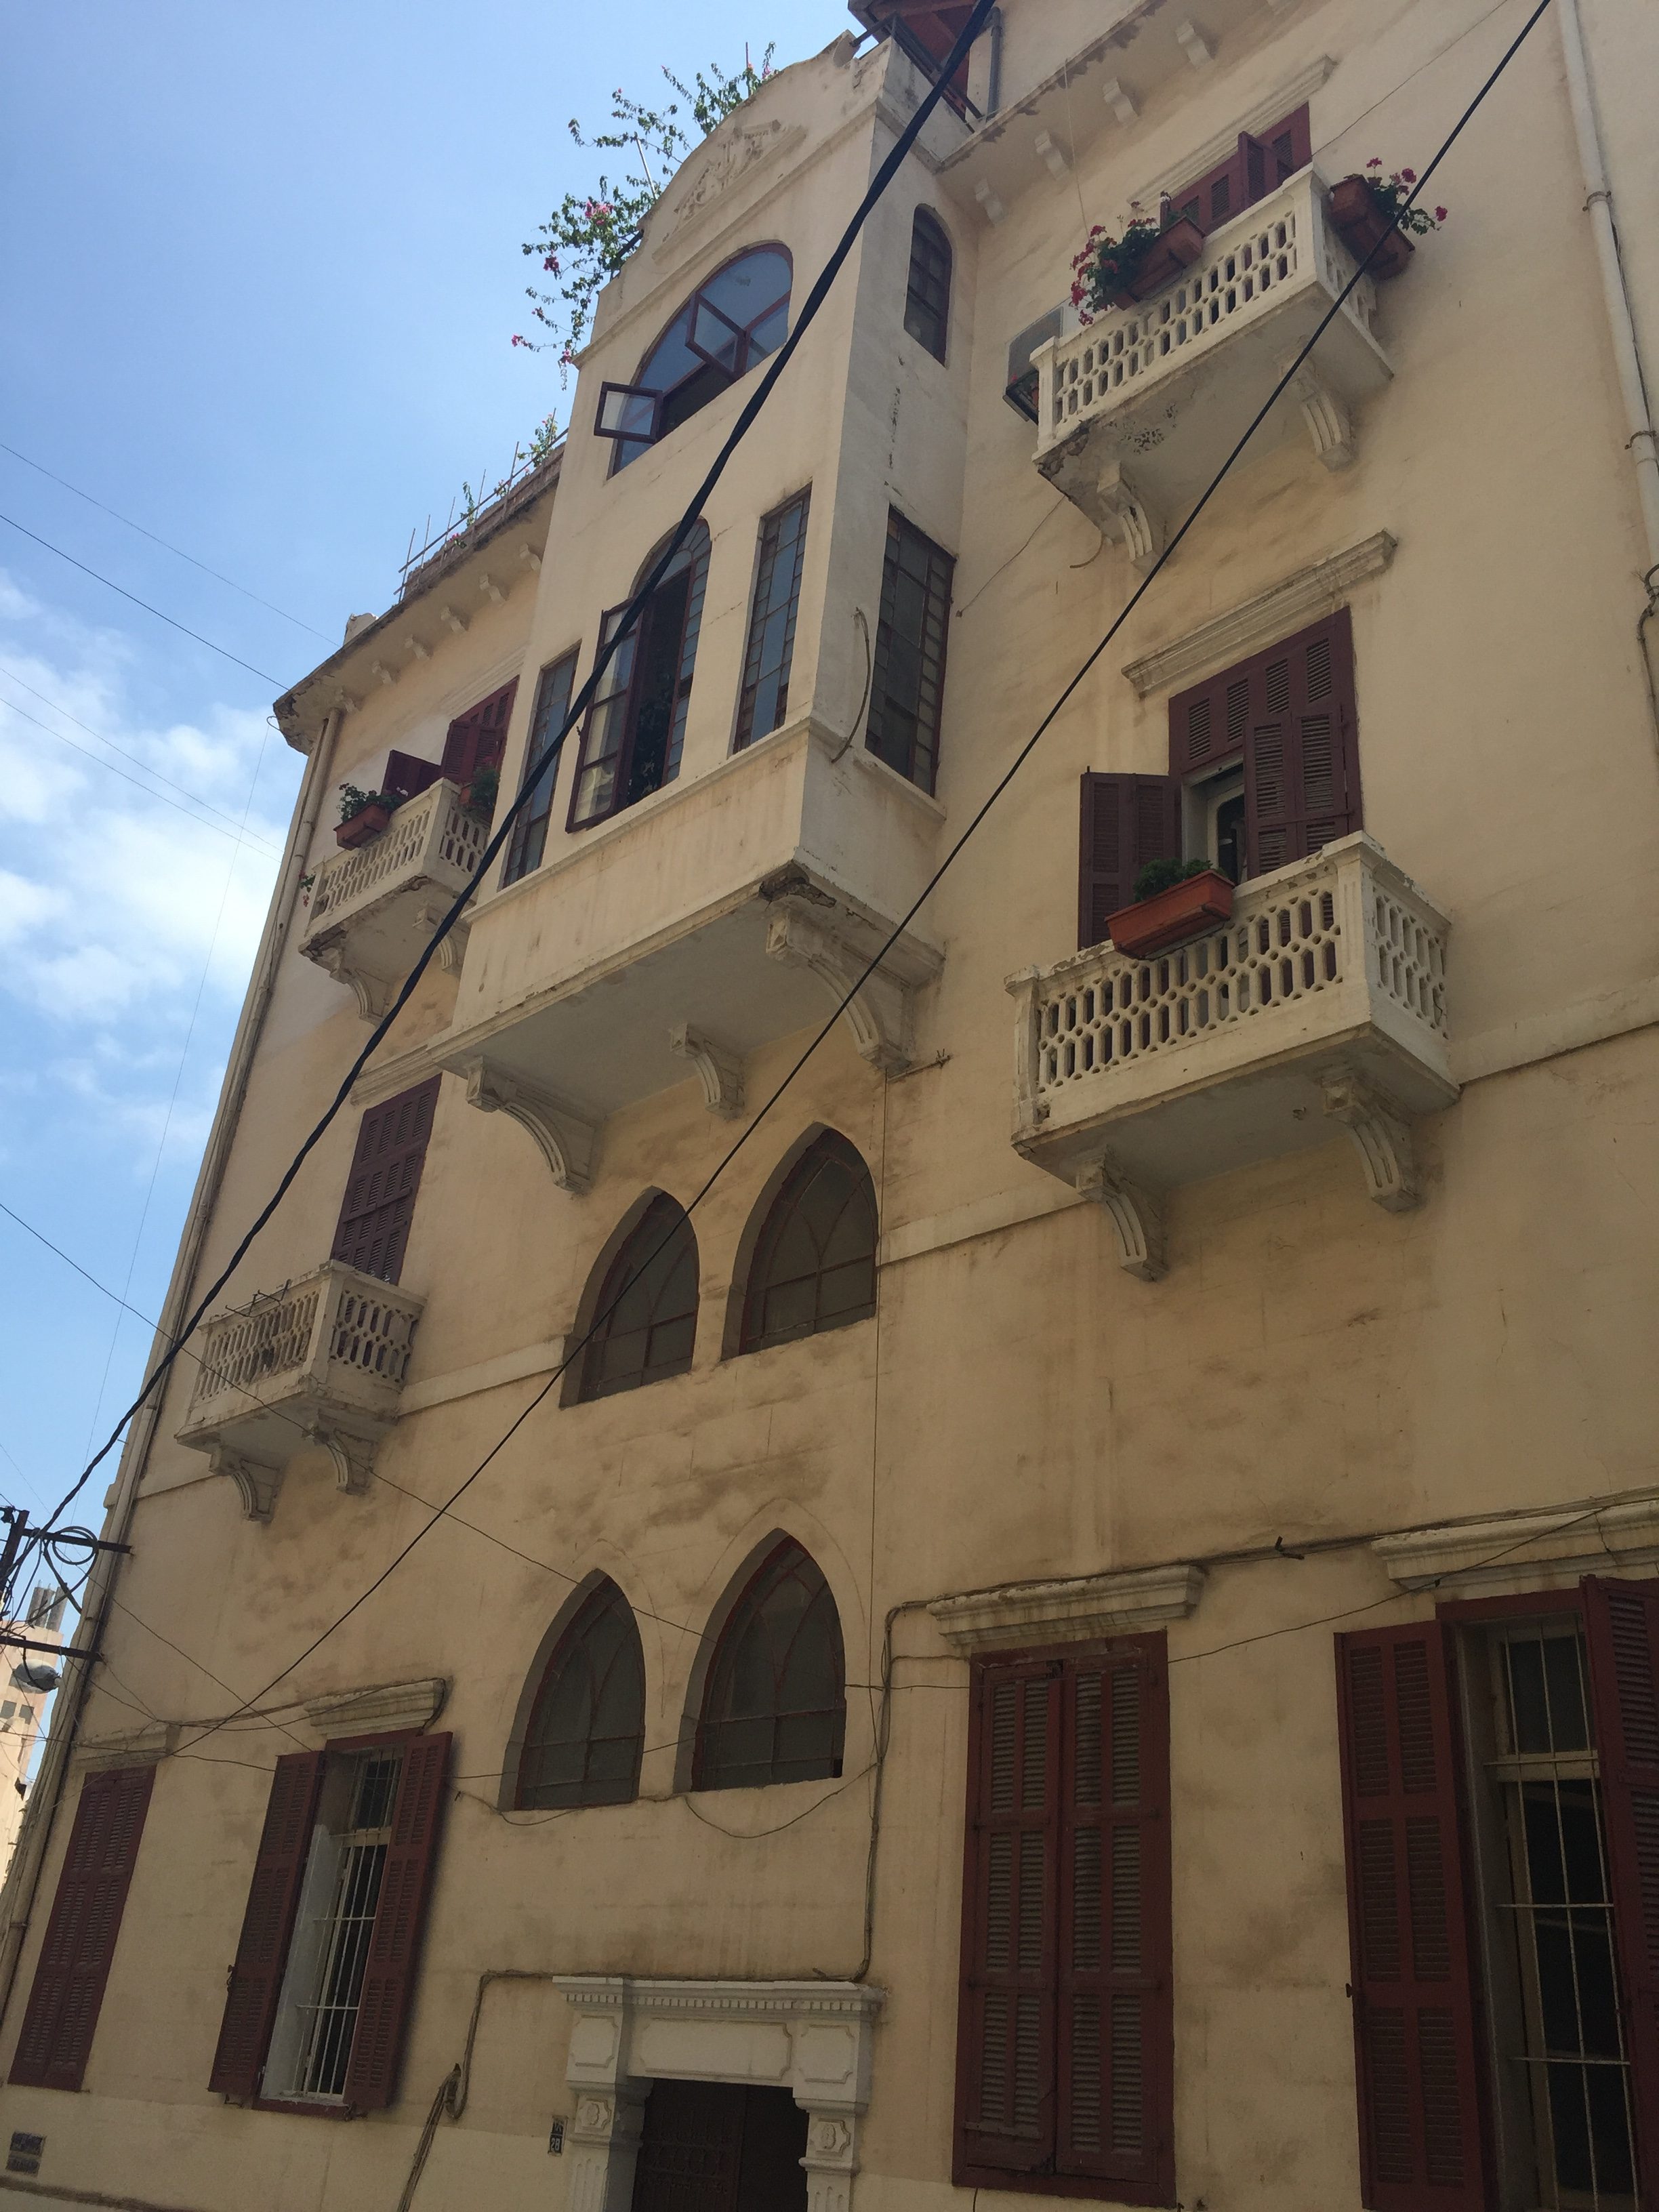 Building from early Beirut, the Republic of Lebanon